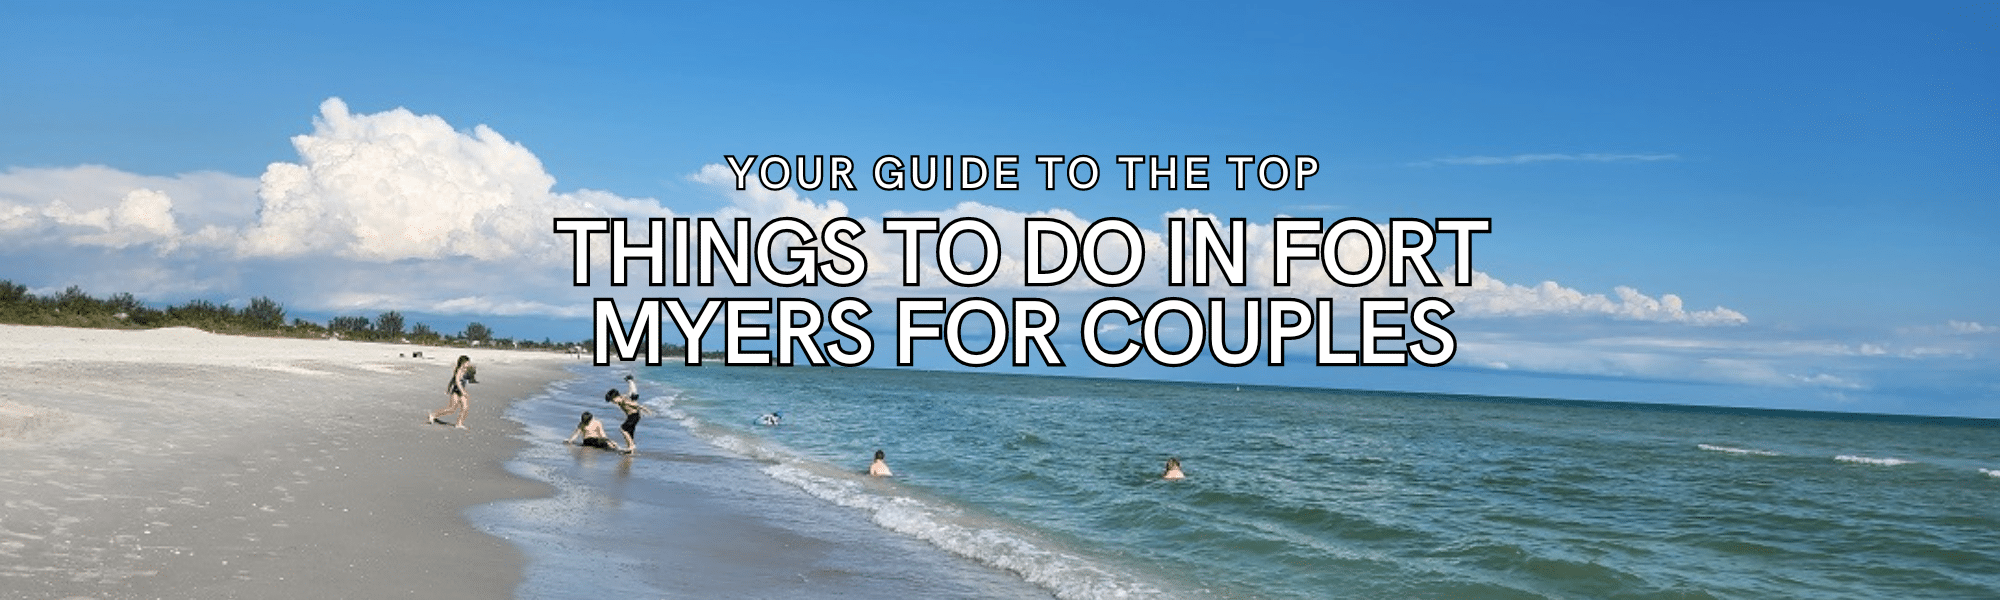 Things to do in Fort Myers for Couples